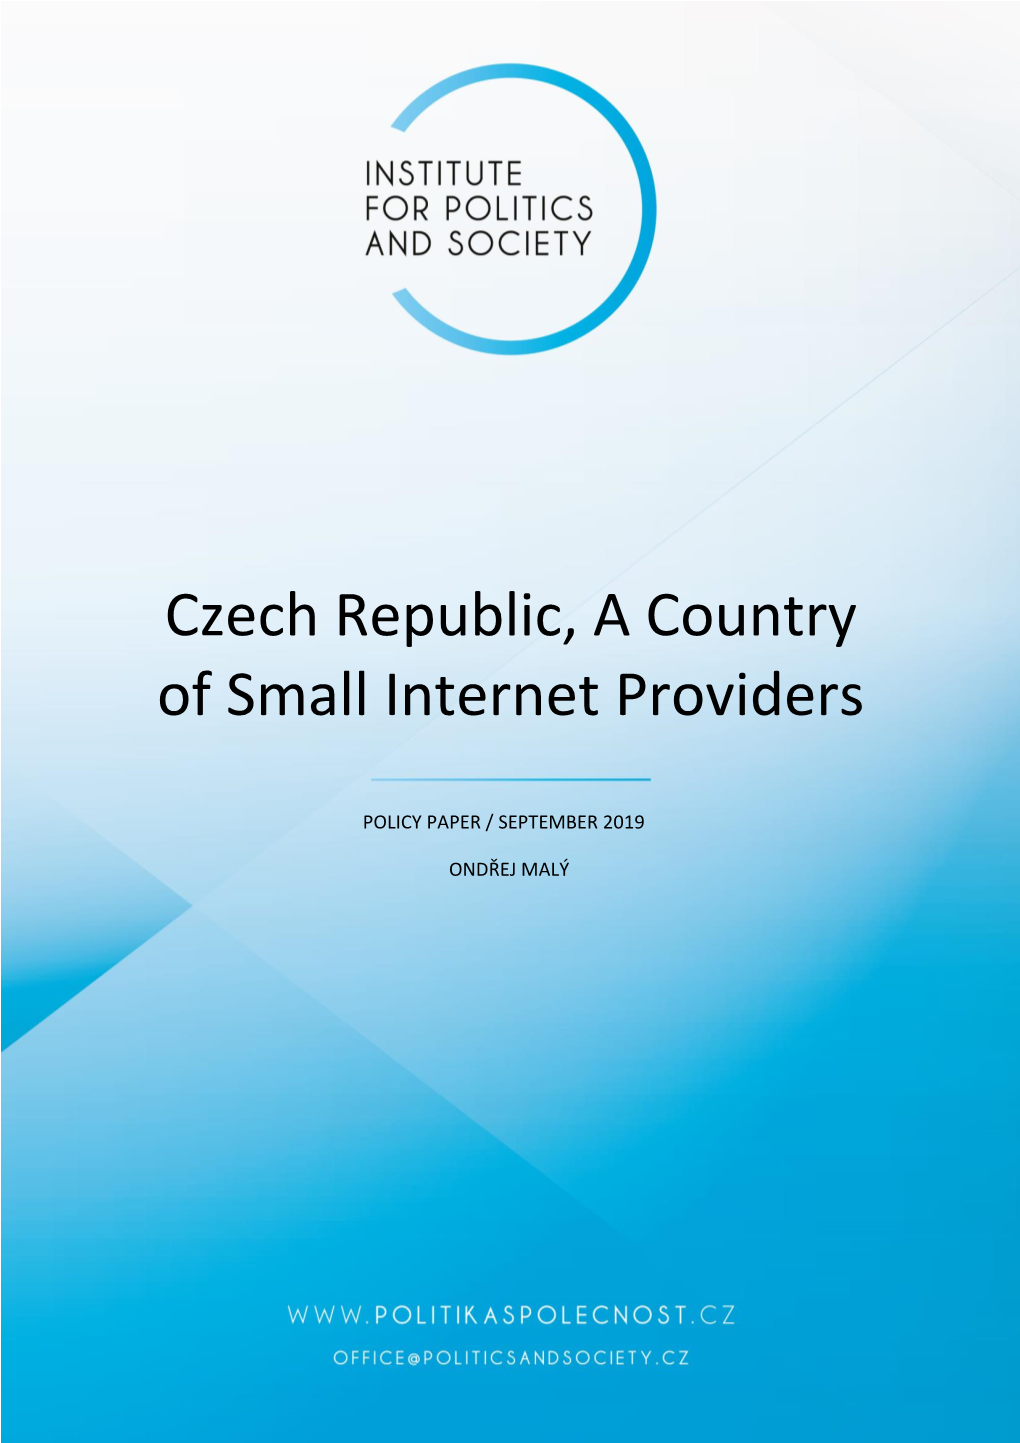 Czech Republic, a Country of Small Internet Providers